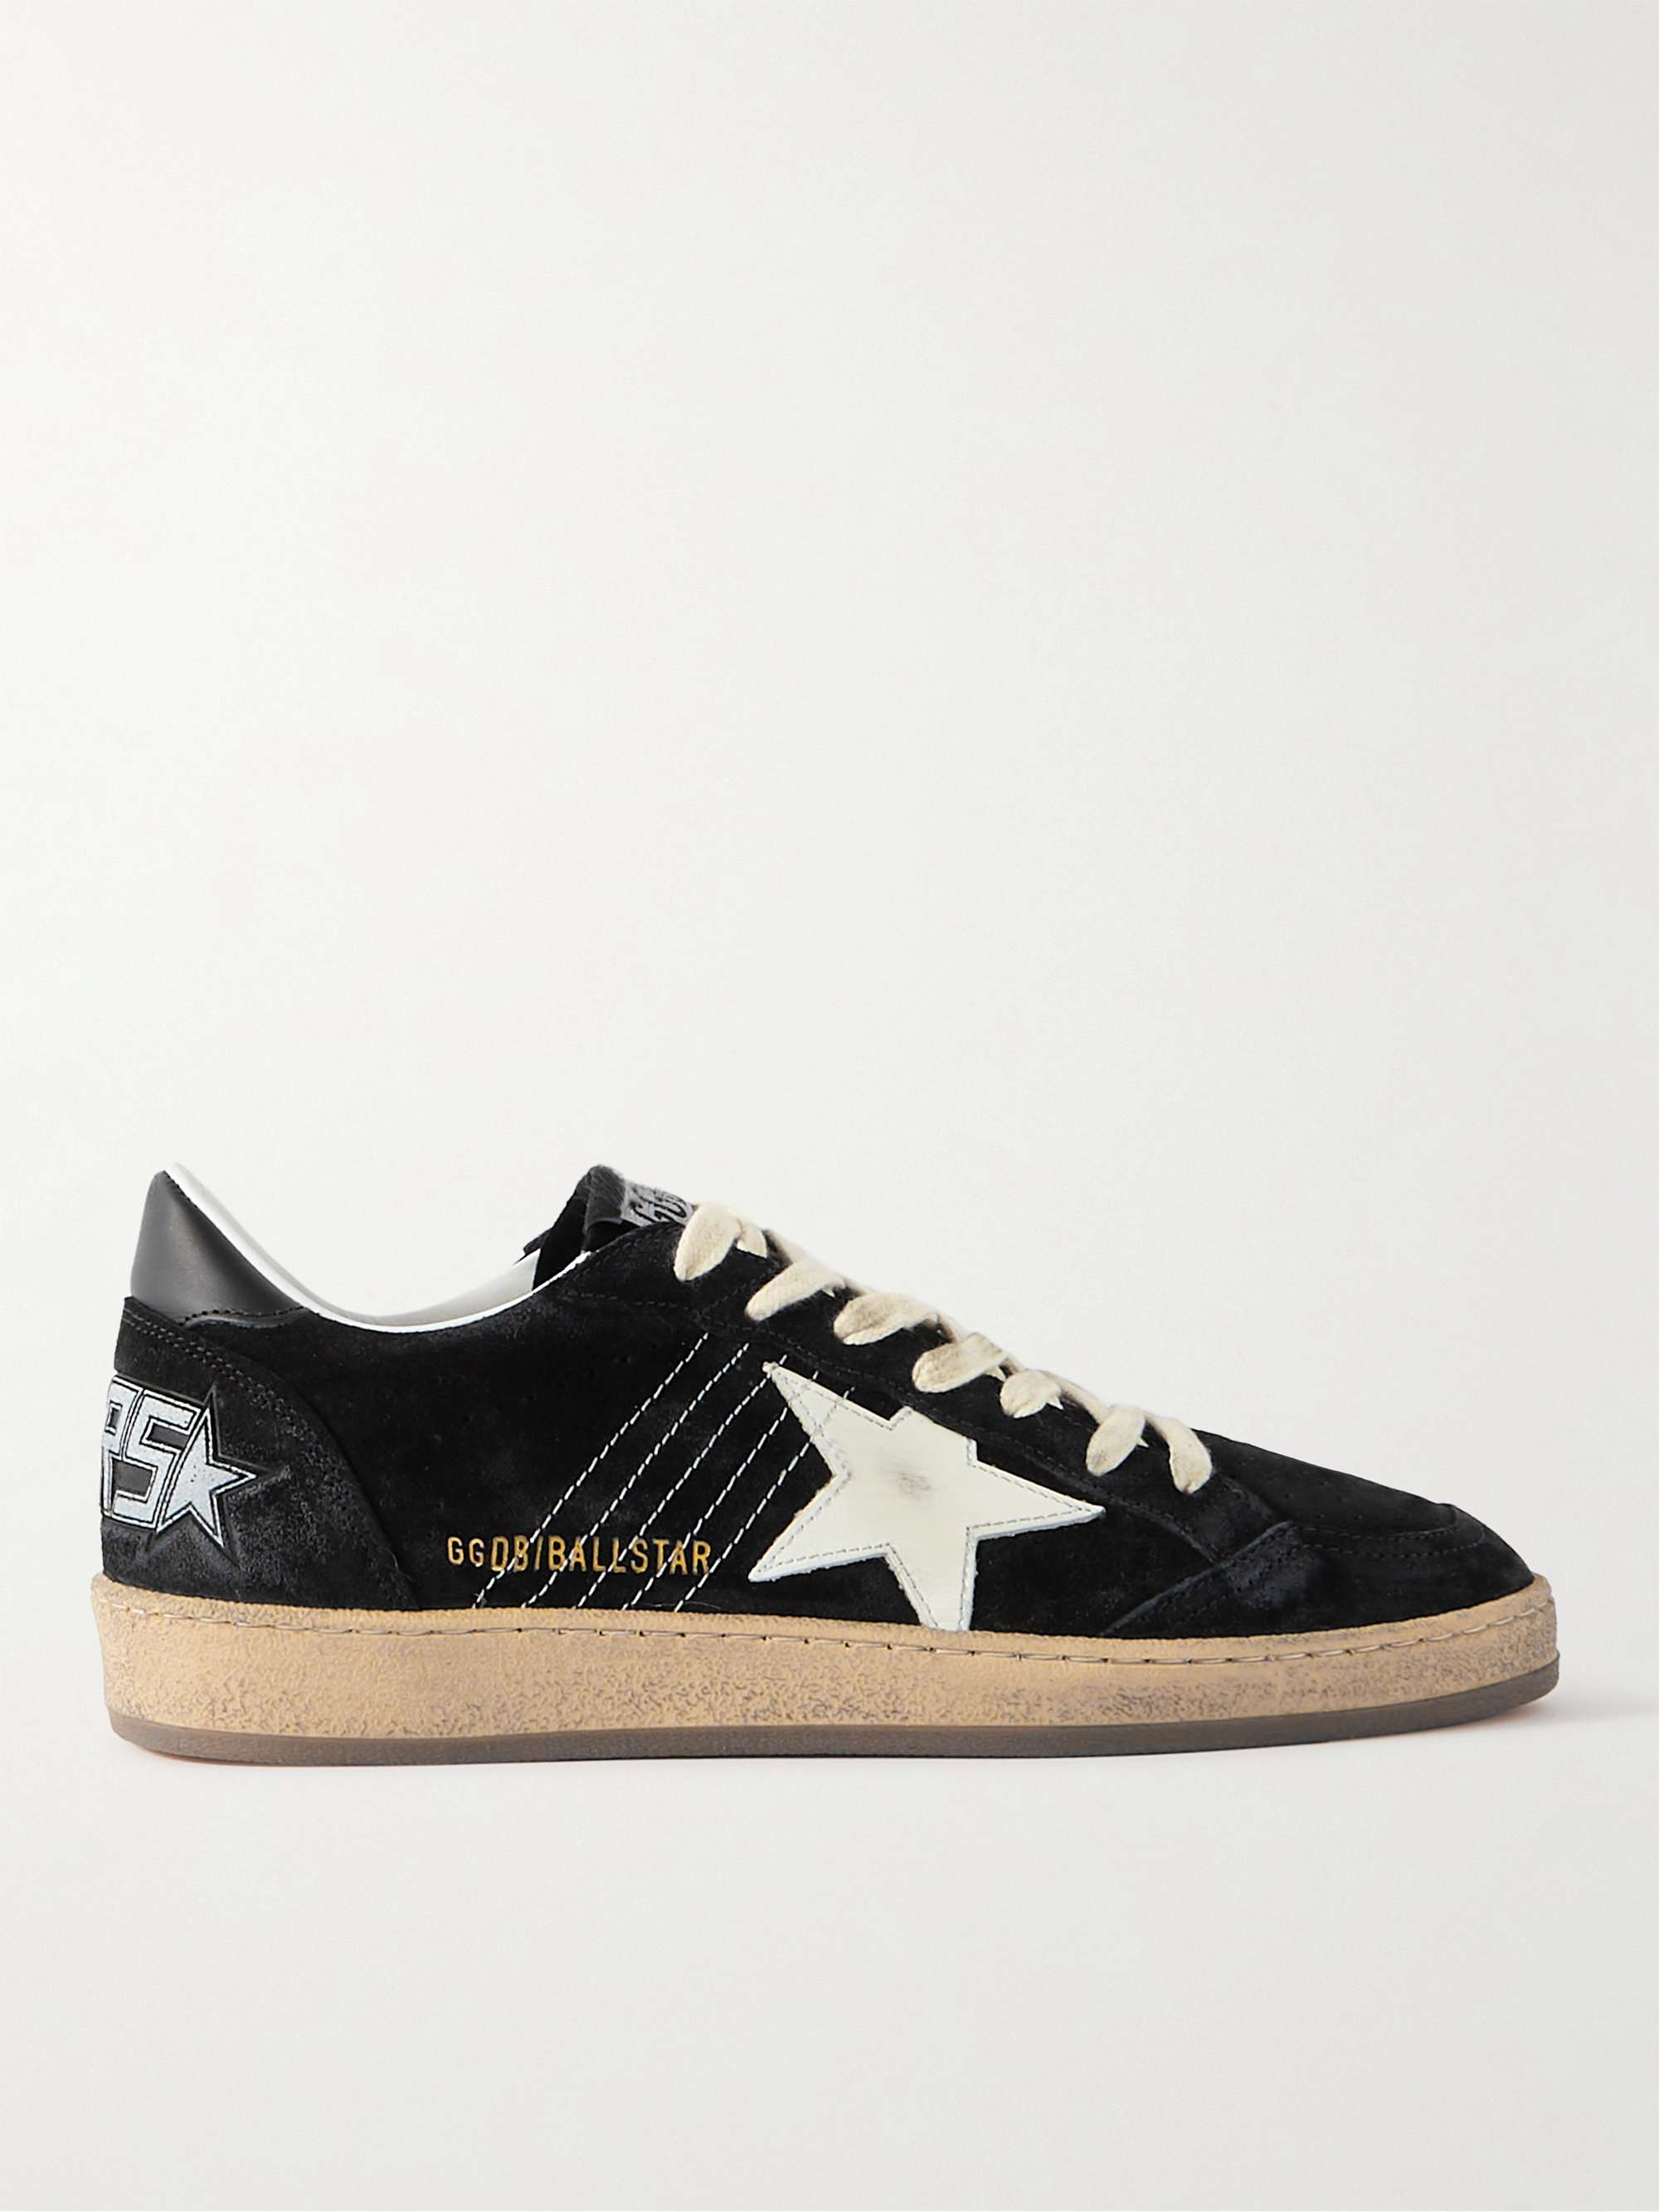 GOLDEN GOOSE Superstar distressed metallic leather and suede